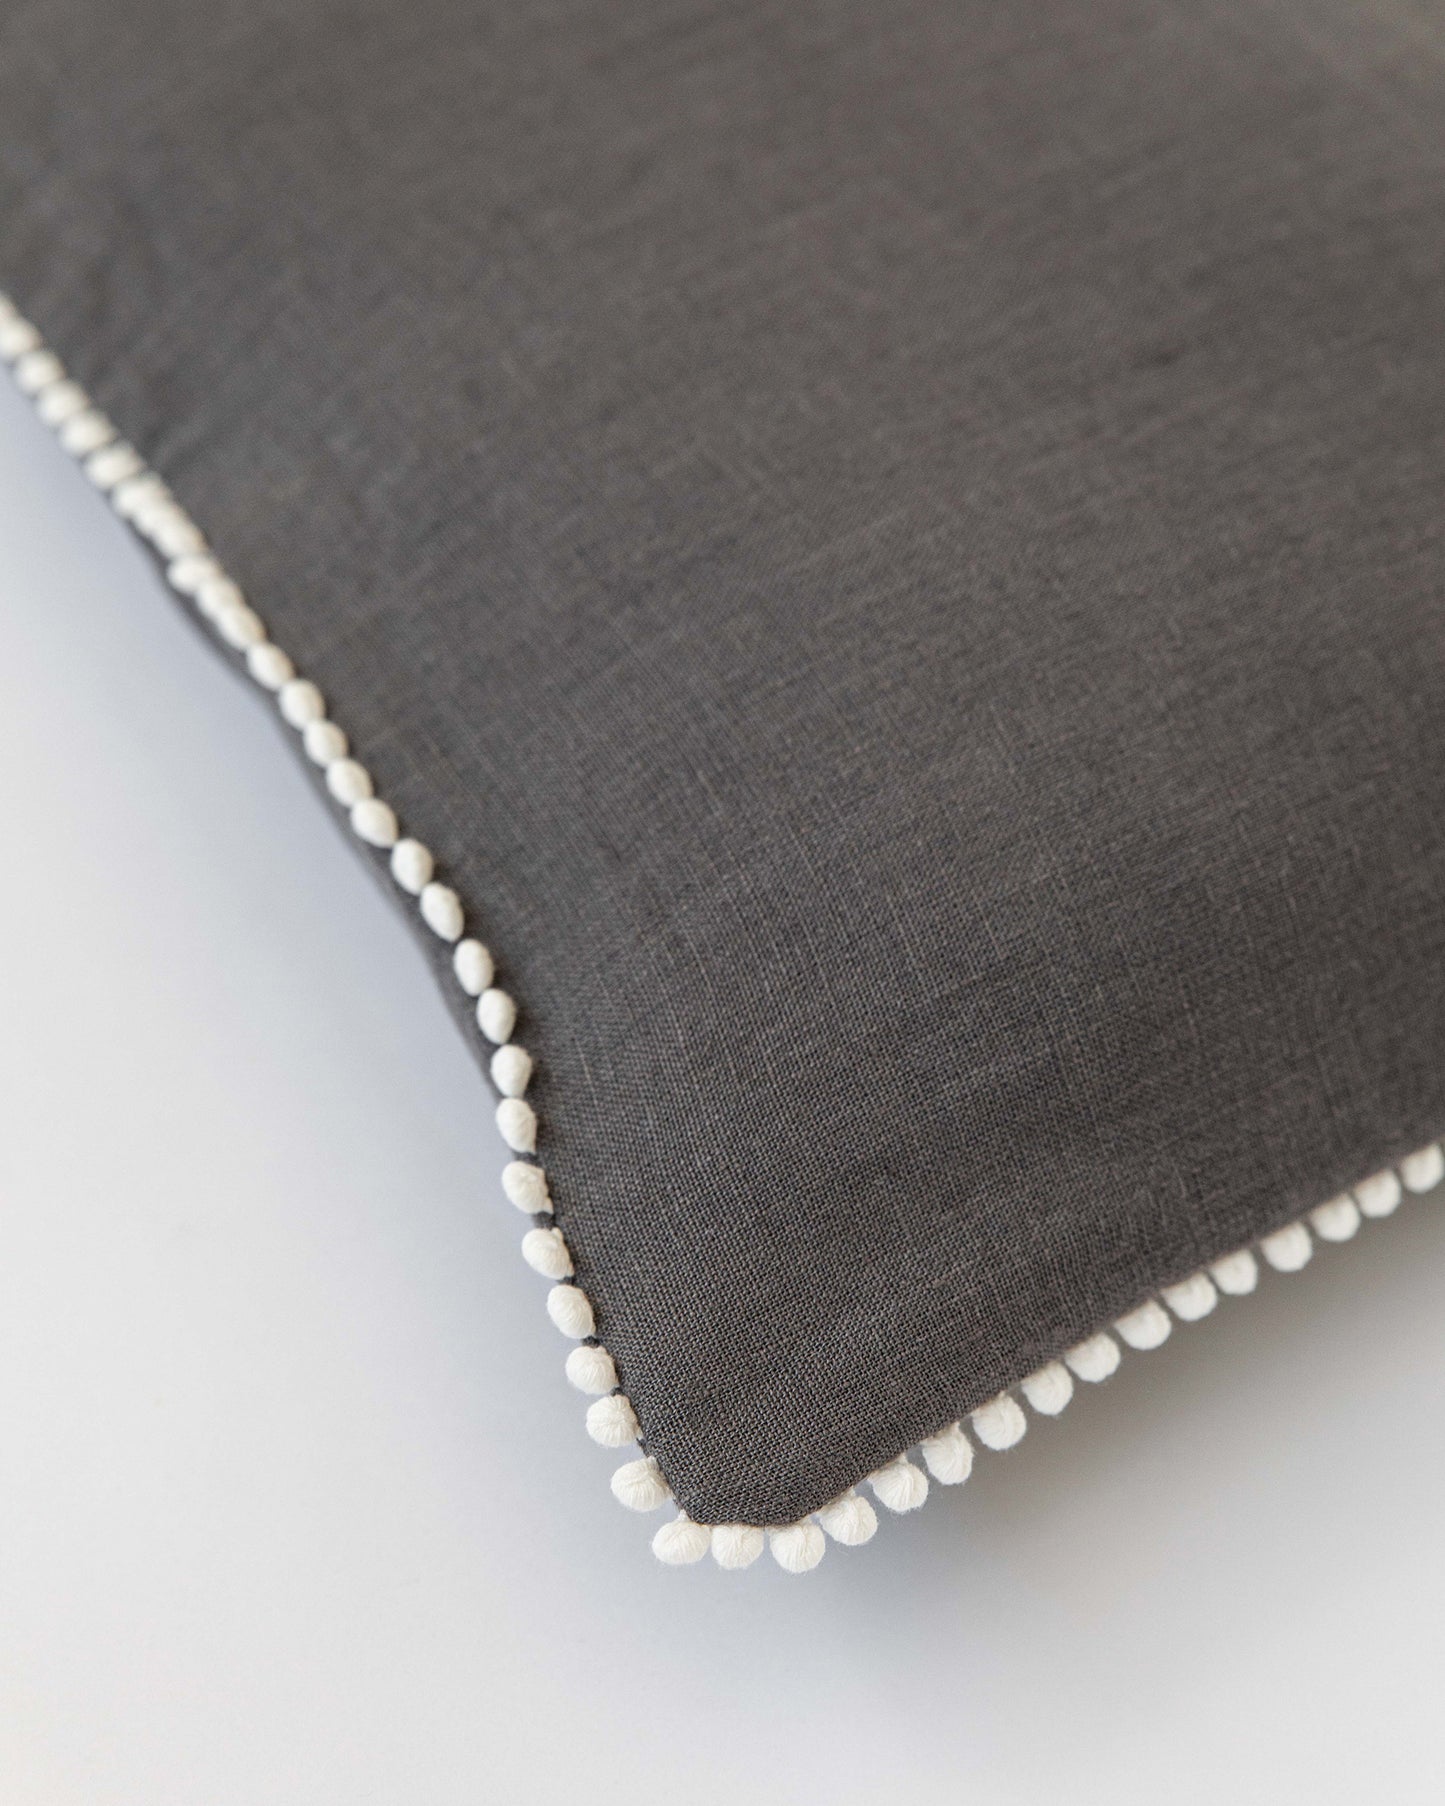 Cushion cover with pom poms in Charcoal gray - MagicLinen